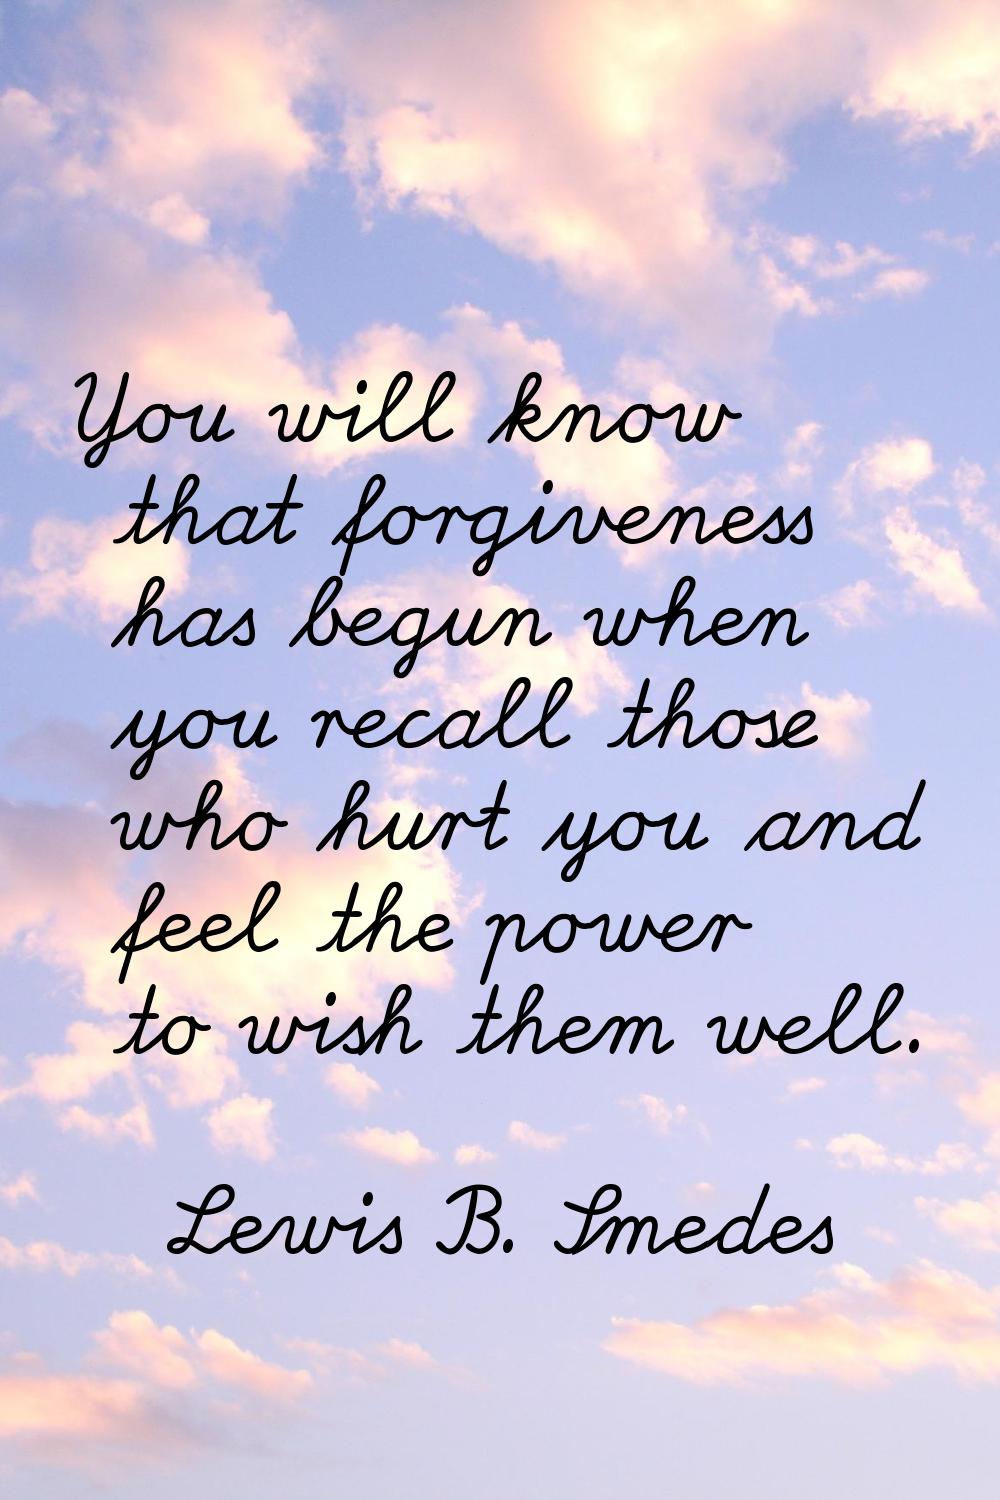 You will know that forgiveness has begun when you recall those who hurt you and feel the power to w